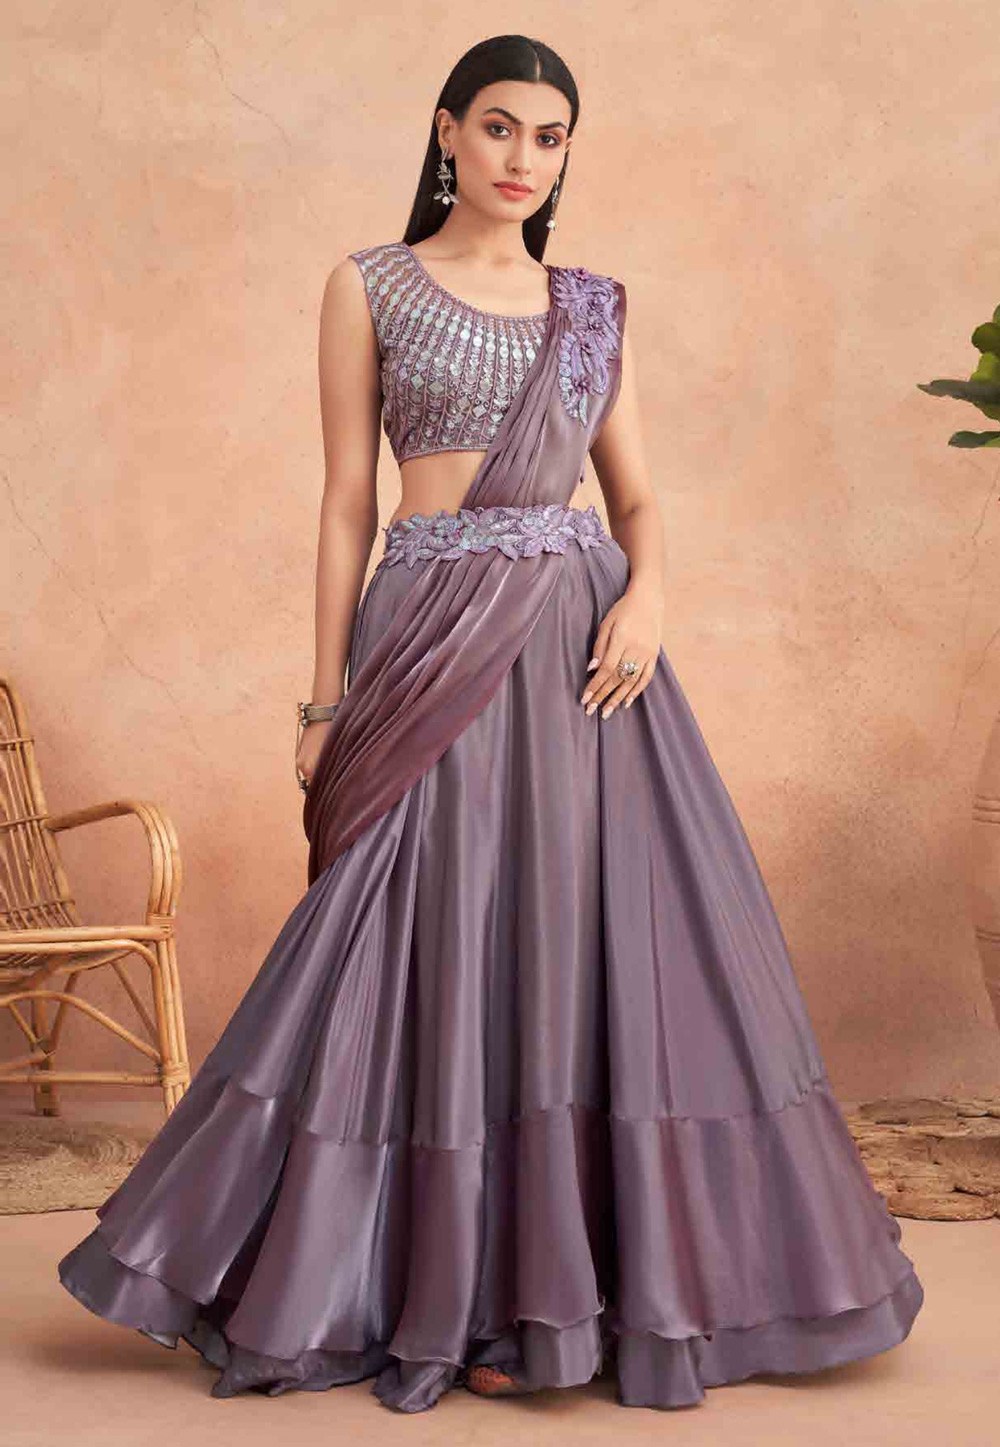 Buy 36/S Size 20 to 40% Discount on Lehenga Style Sarees Indian Plus Size  Dresses Online for Women in USA